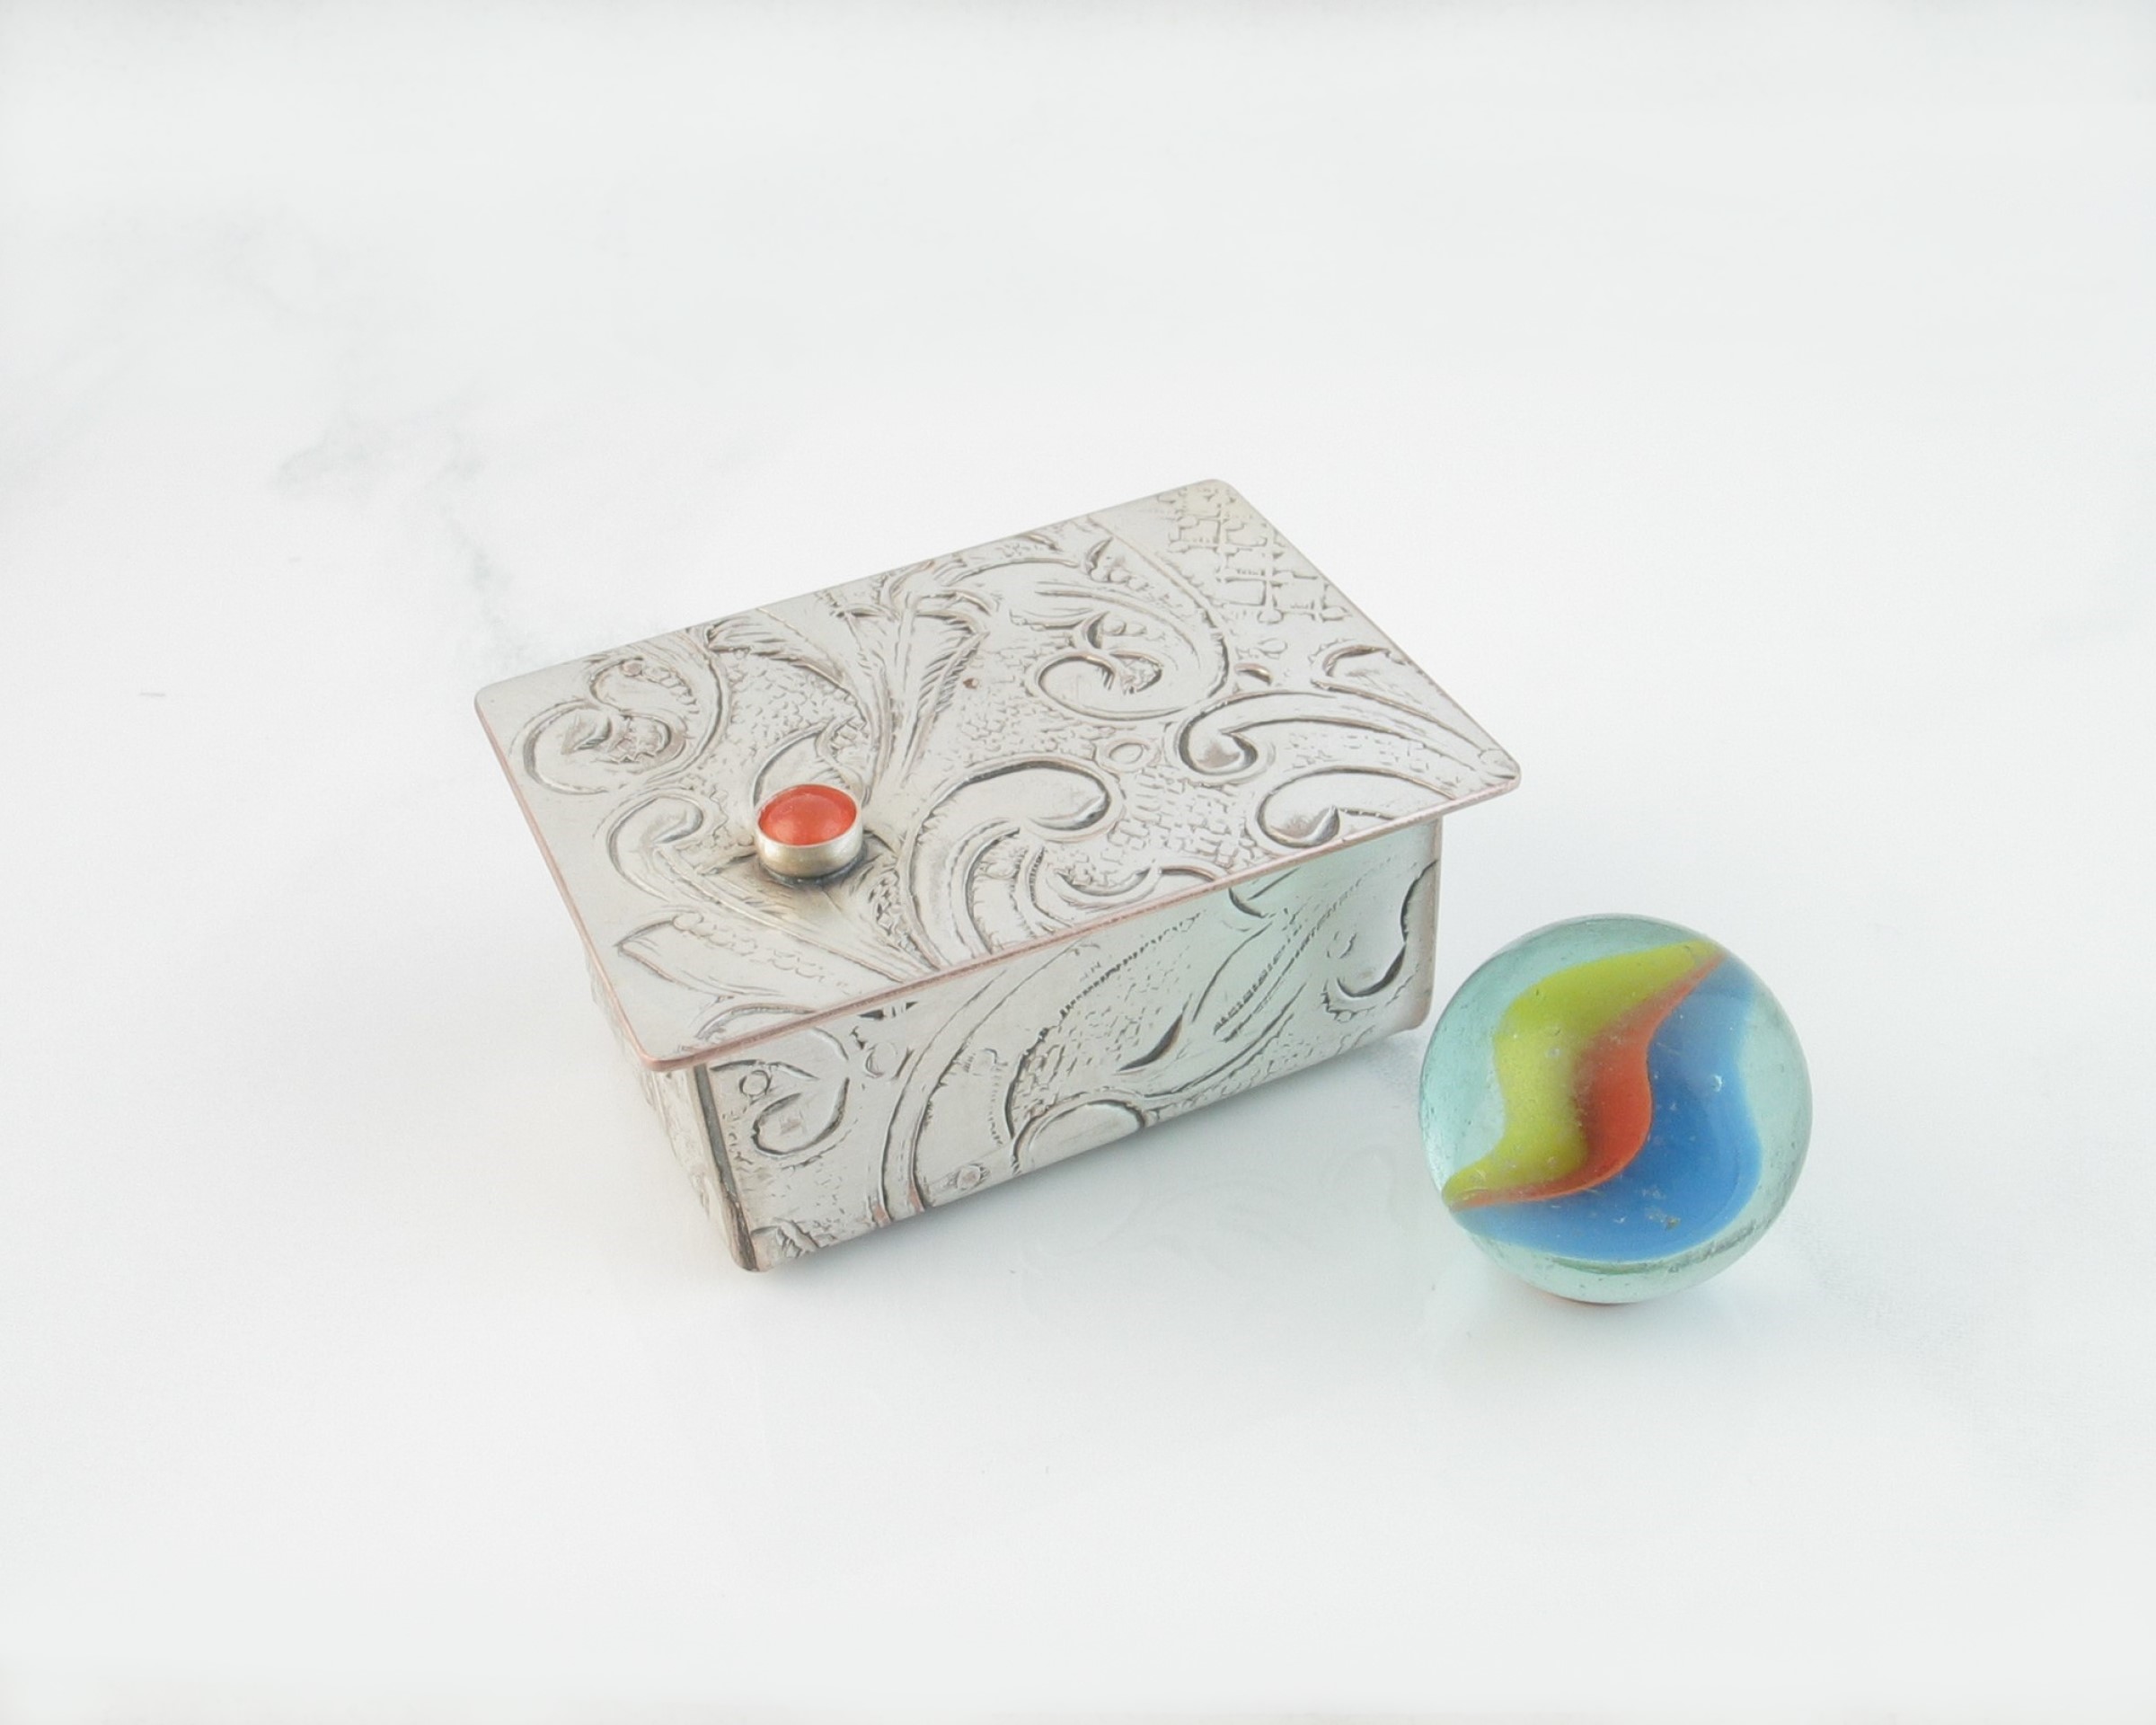 Miniature Silver Trinket Box with Carnelian gemstone, shown with a small cat eye marble for size comparison